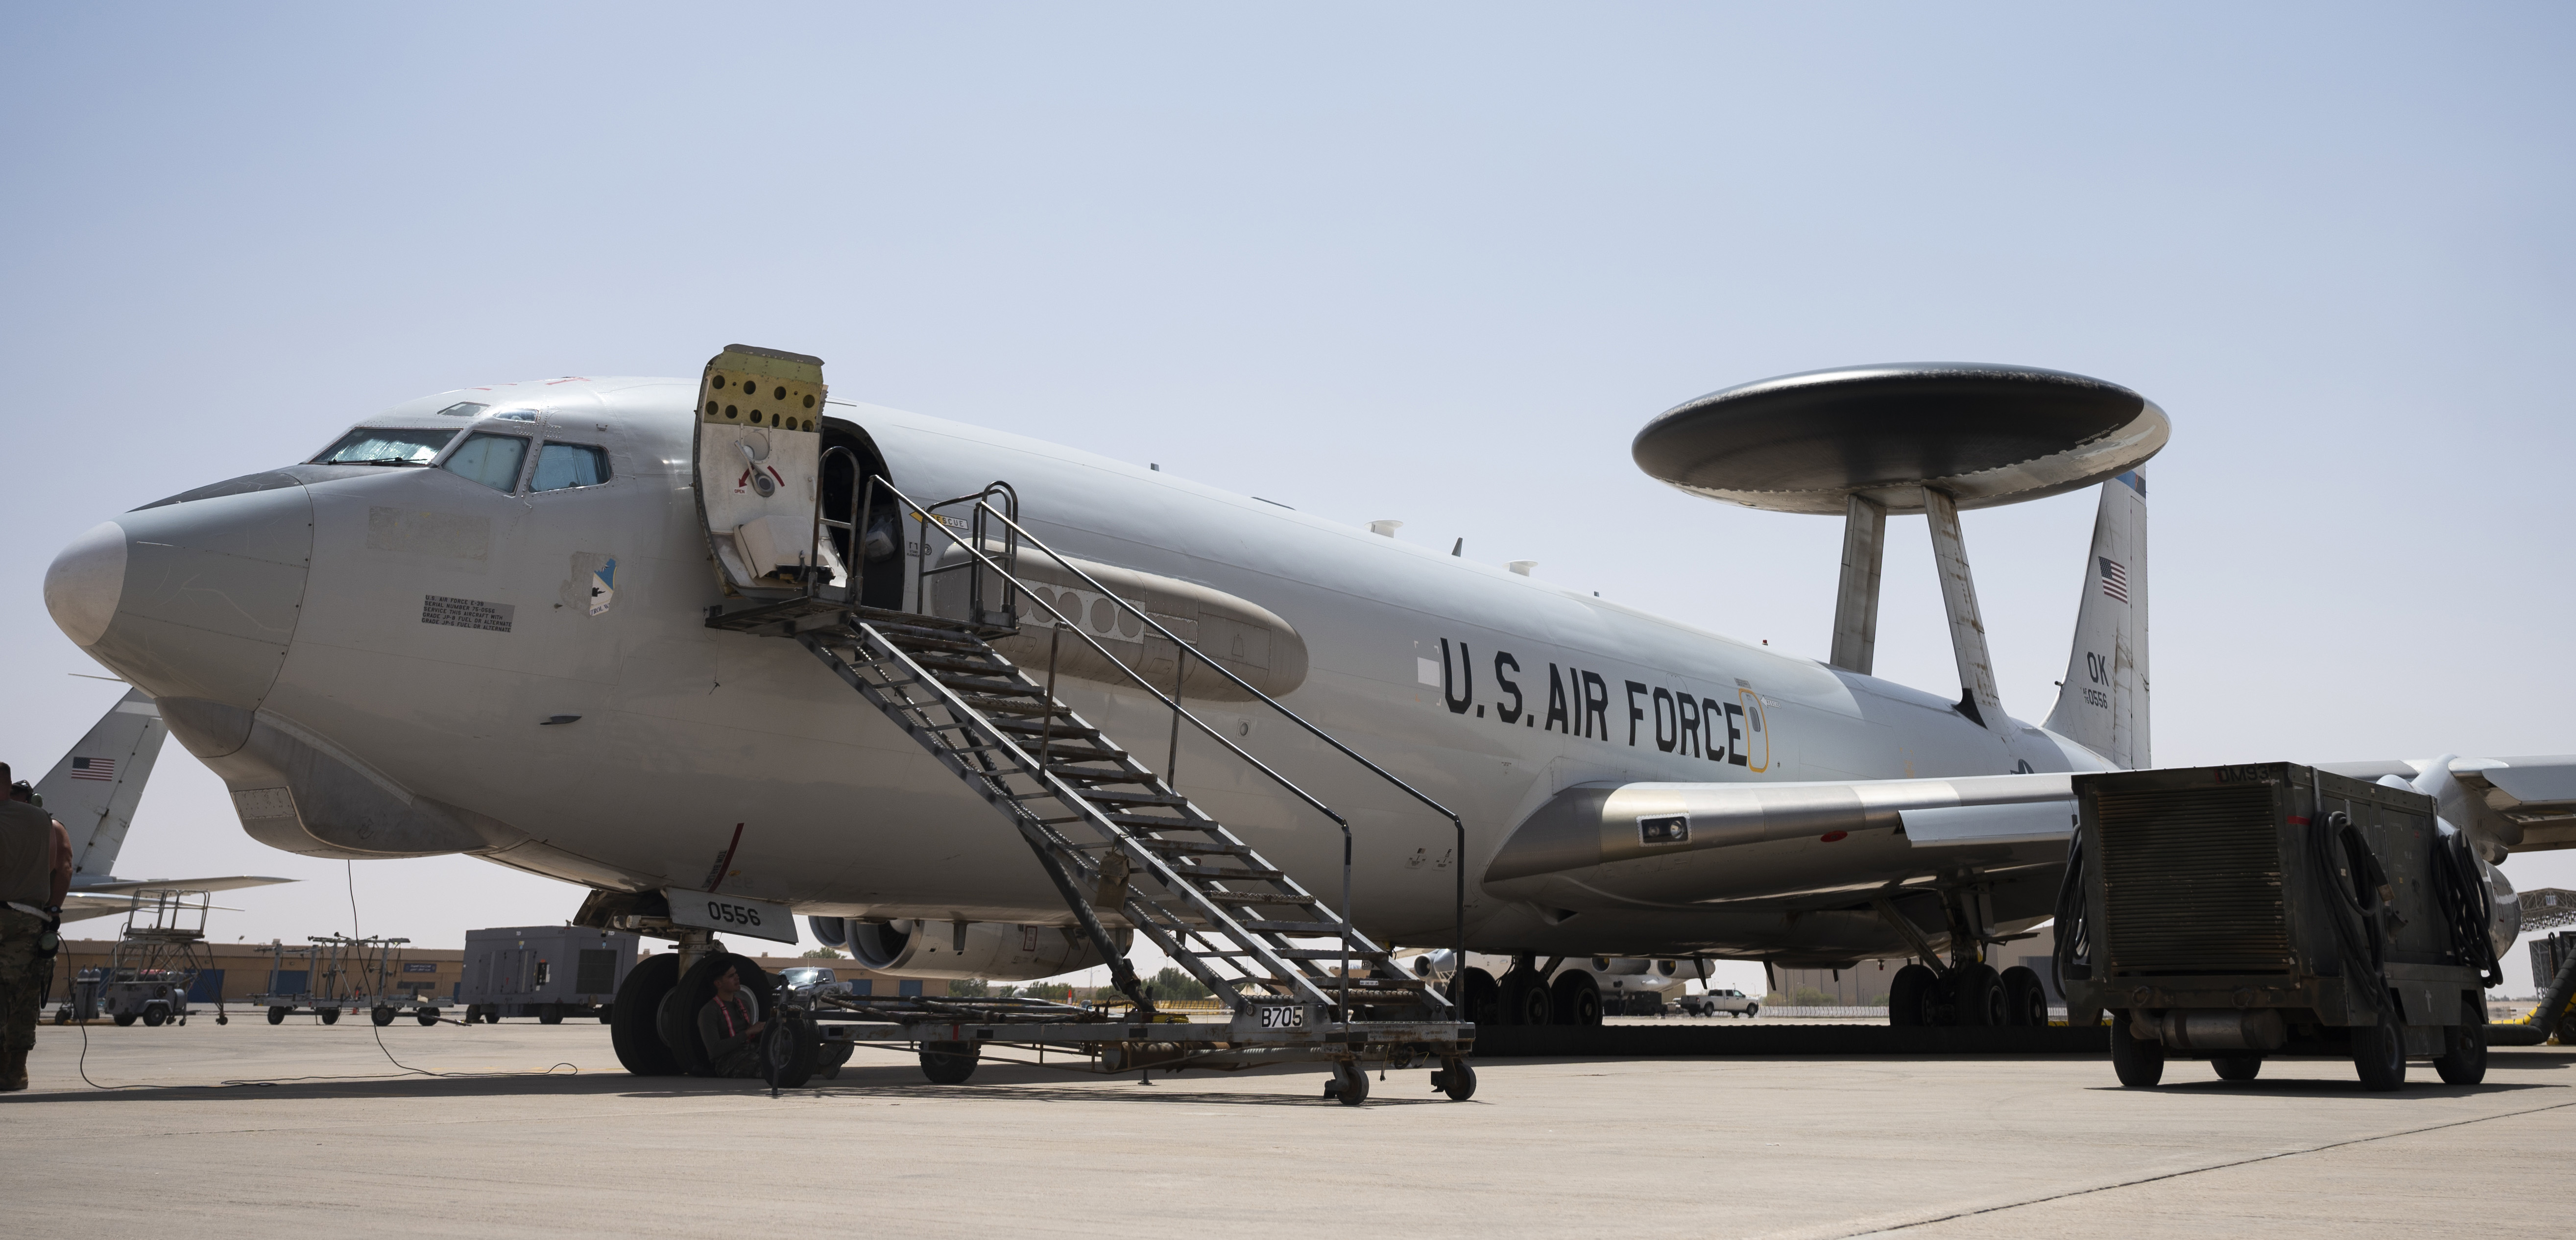 E-3G Sentry Airborne Warning and Control System aircraft